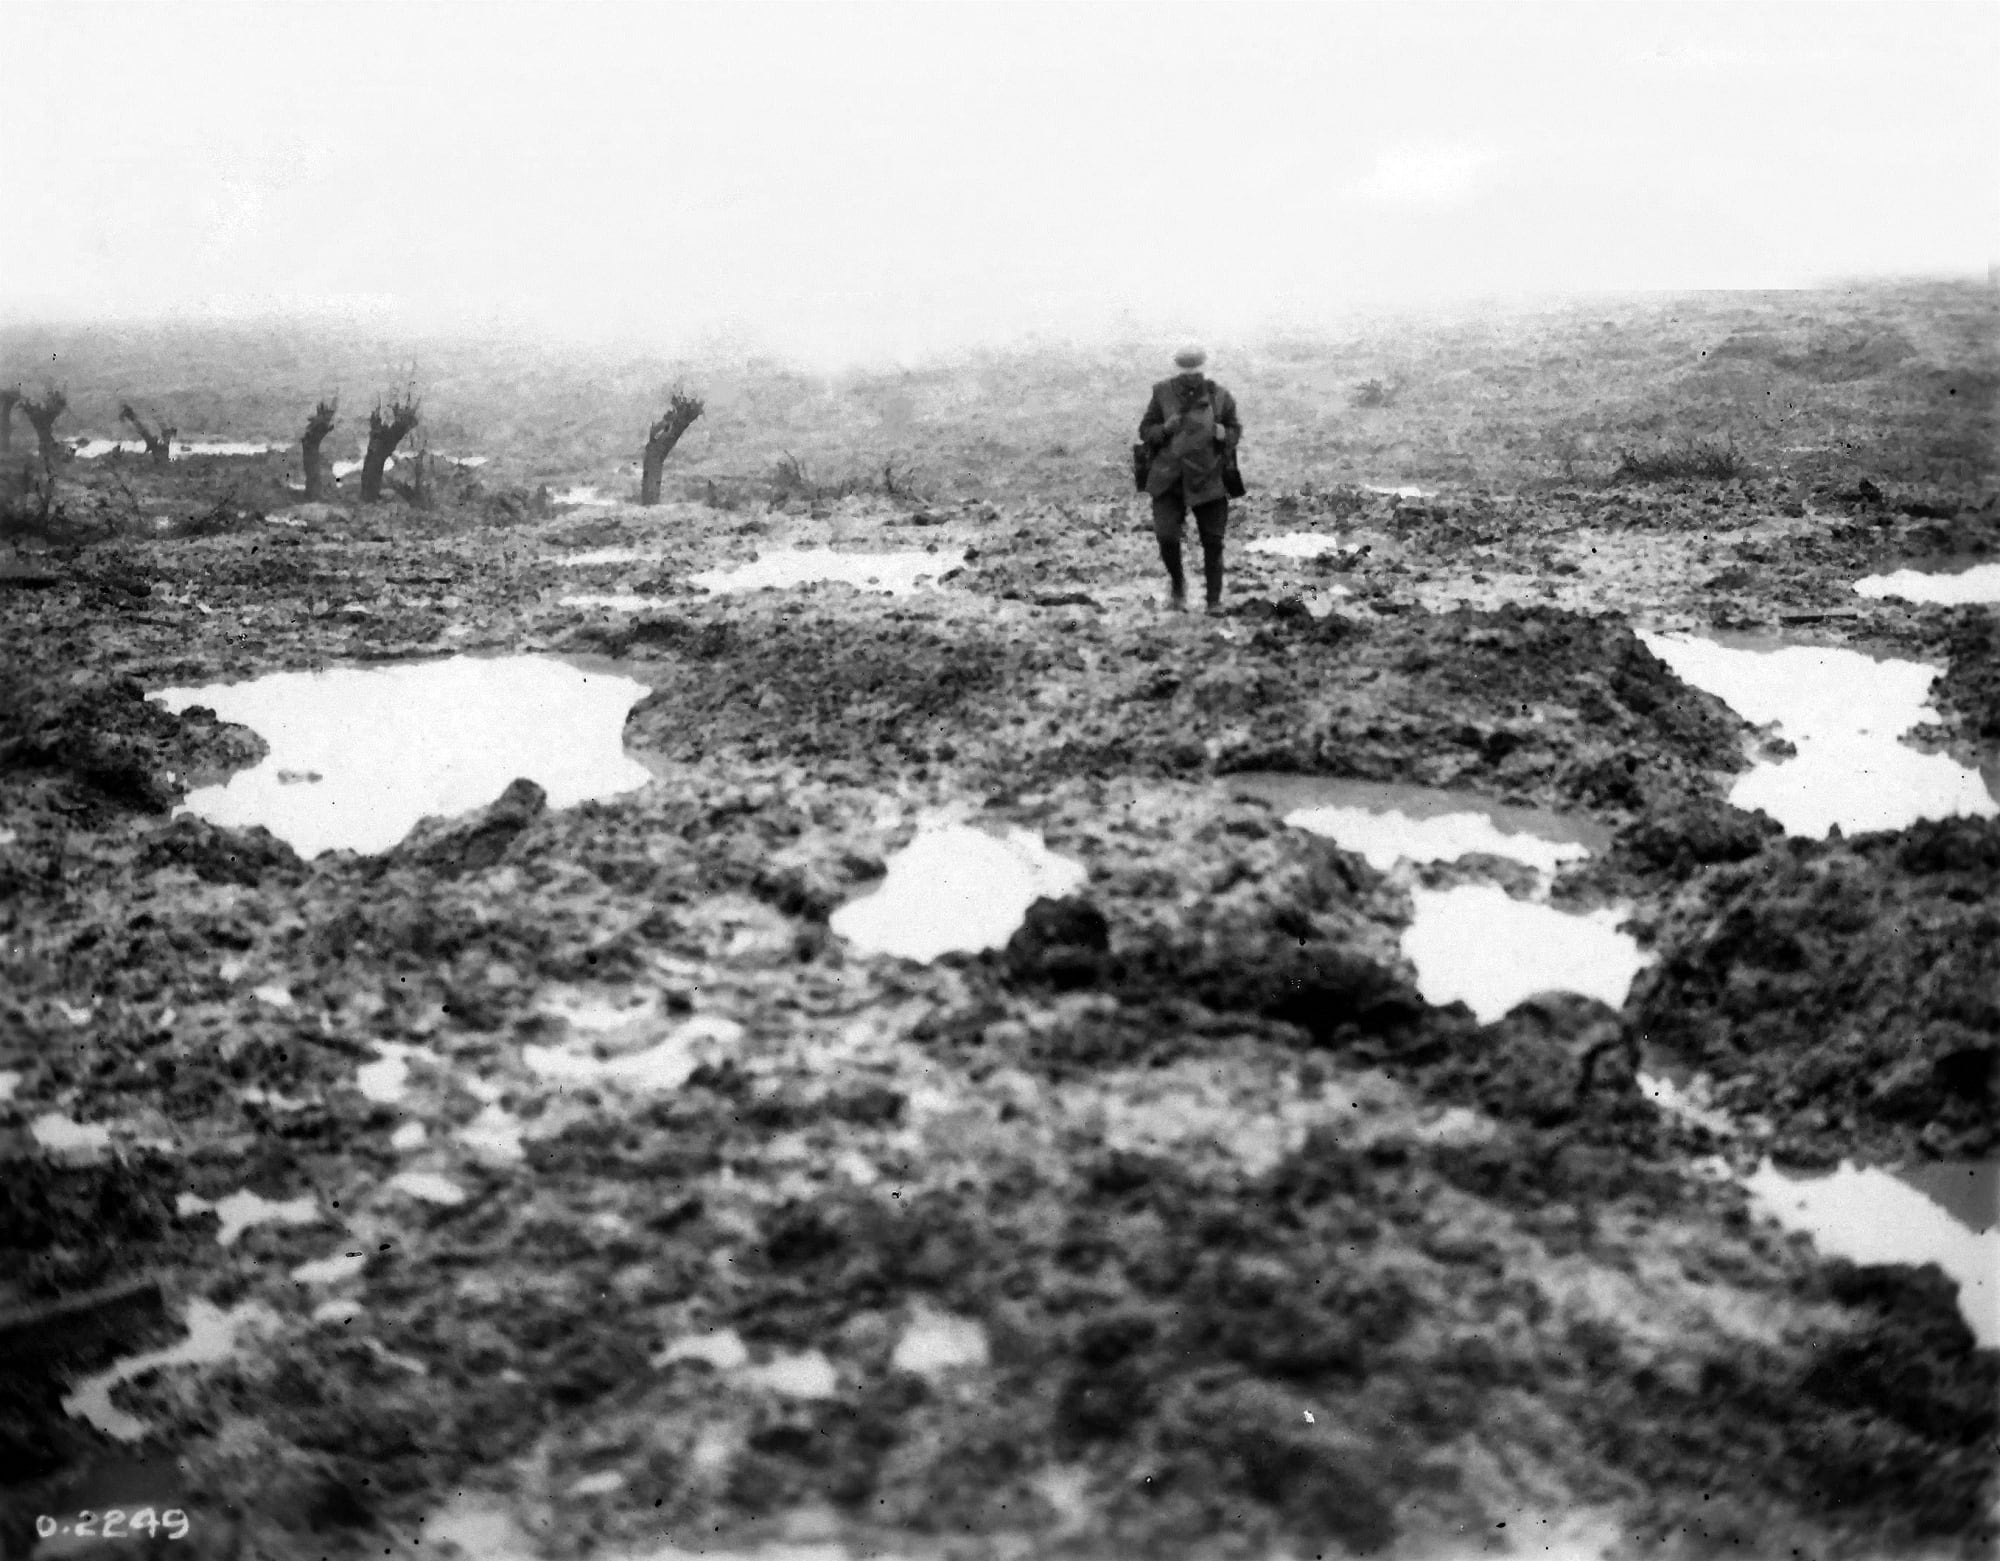 Battling the elements — Mud and barbed wire during the Battle of Passchendaele